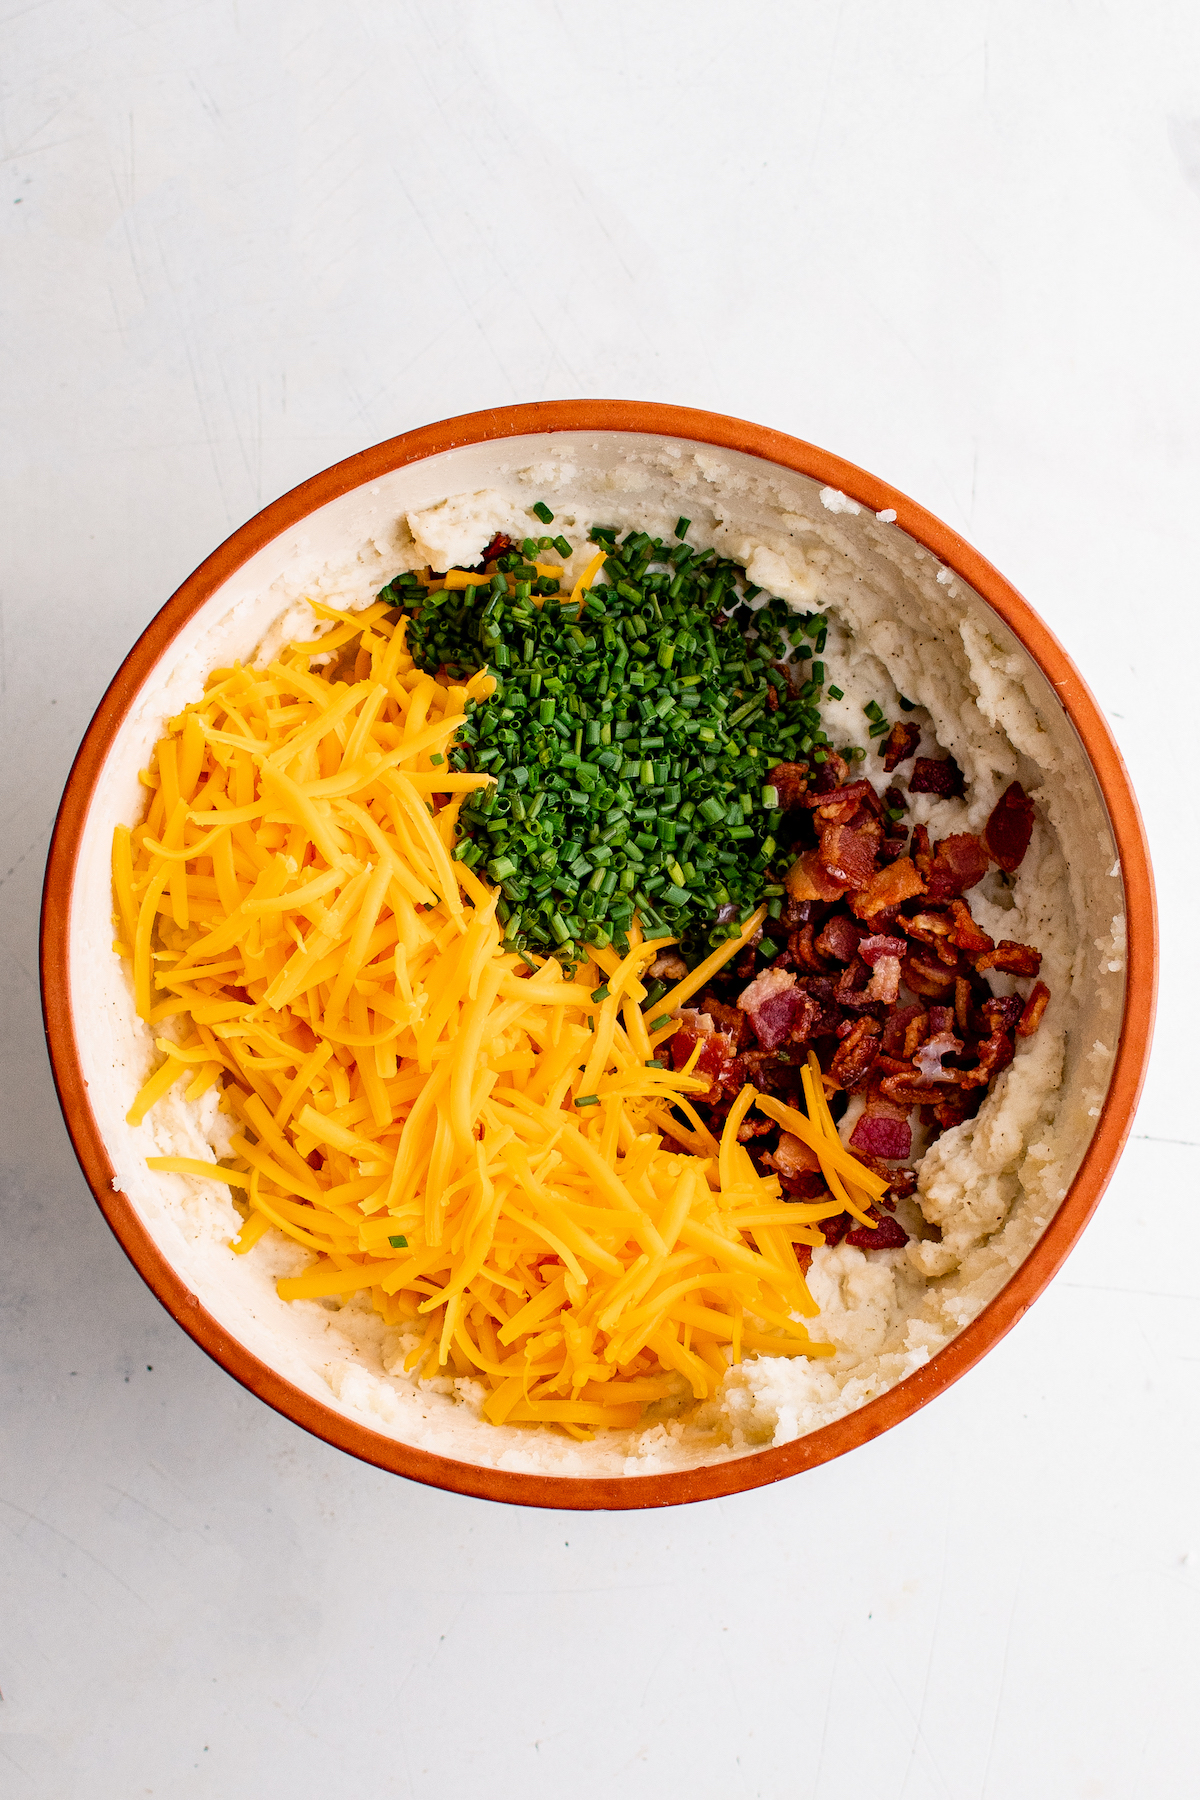 Adding shredded cheese, chives, and bacon to a mixing bowl.